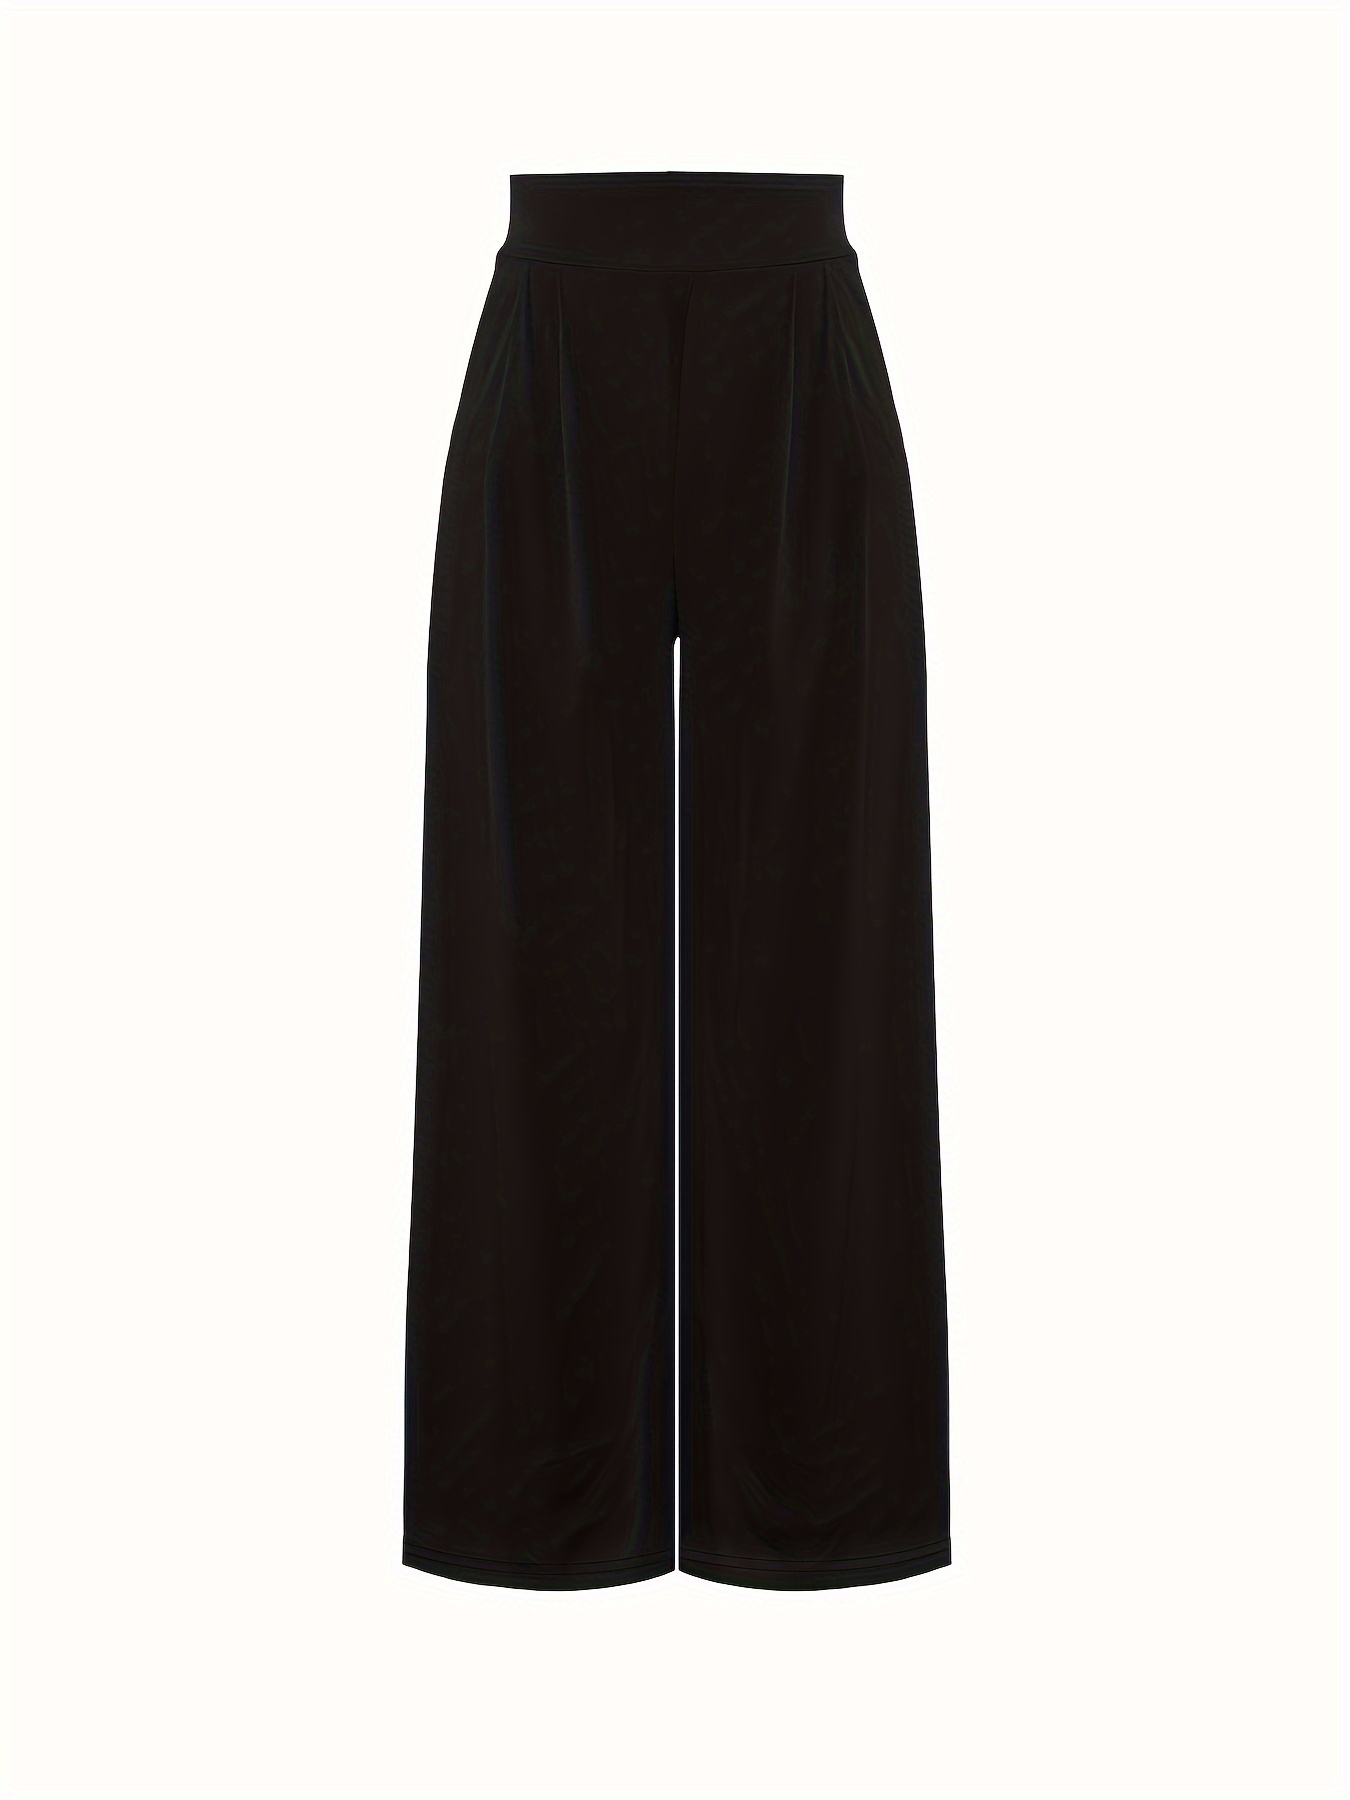 Tall Pull On Wide Leg Crop Pants in Crepe  Fashion, Fashion outfits, Wide  leg crop pants